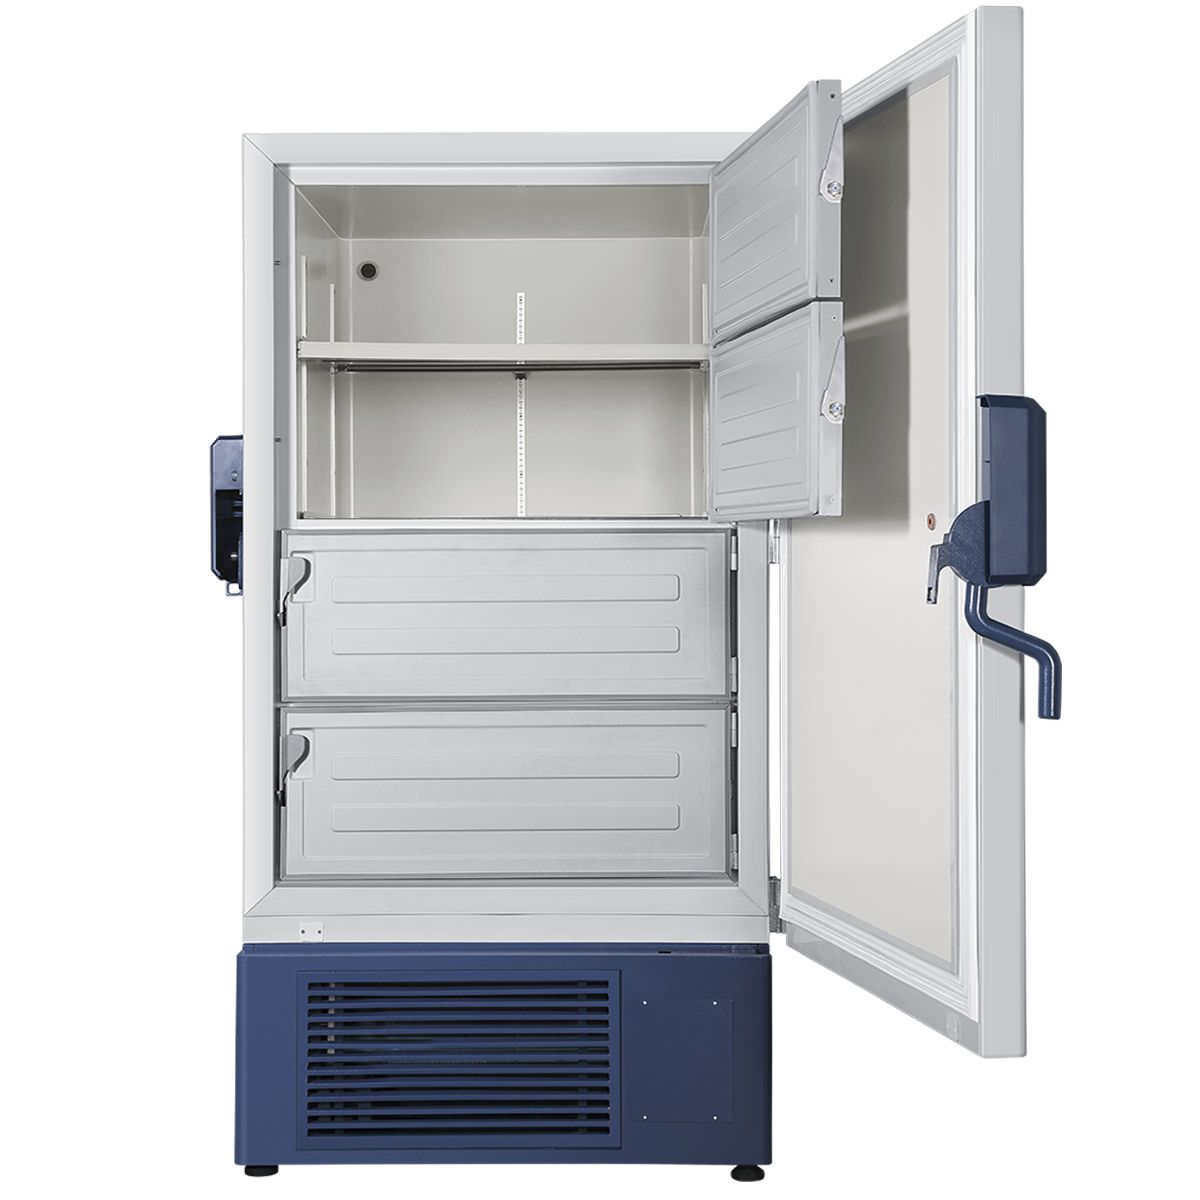 Laboratory freezer / cabinet / ultralow-temperature / 1-door -86 °C, 728 L | DW-86L728J Haier Medical and Laboratory Products